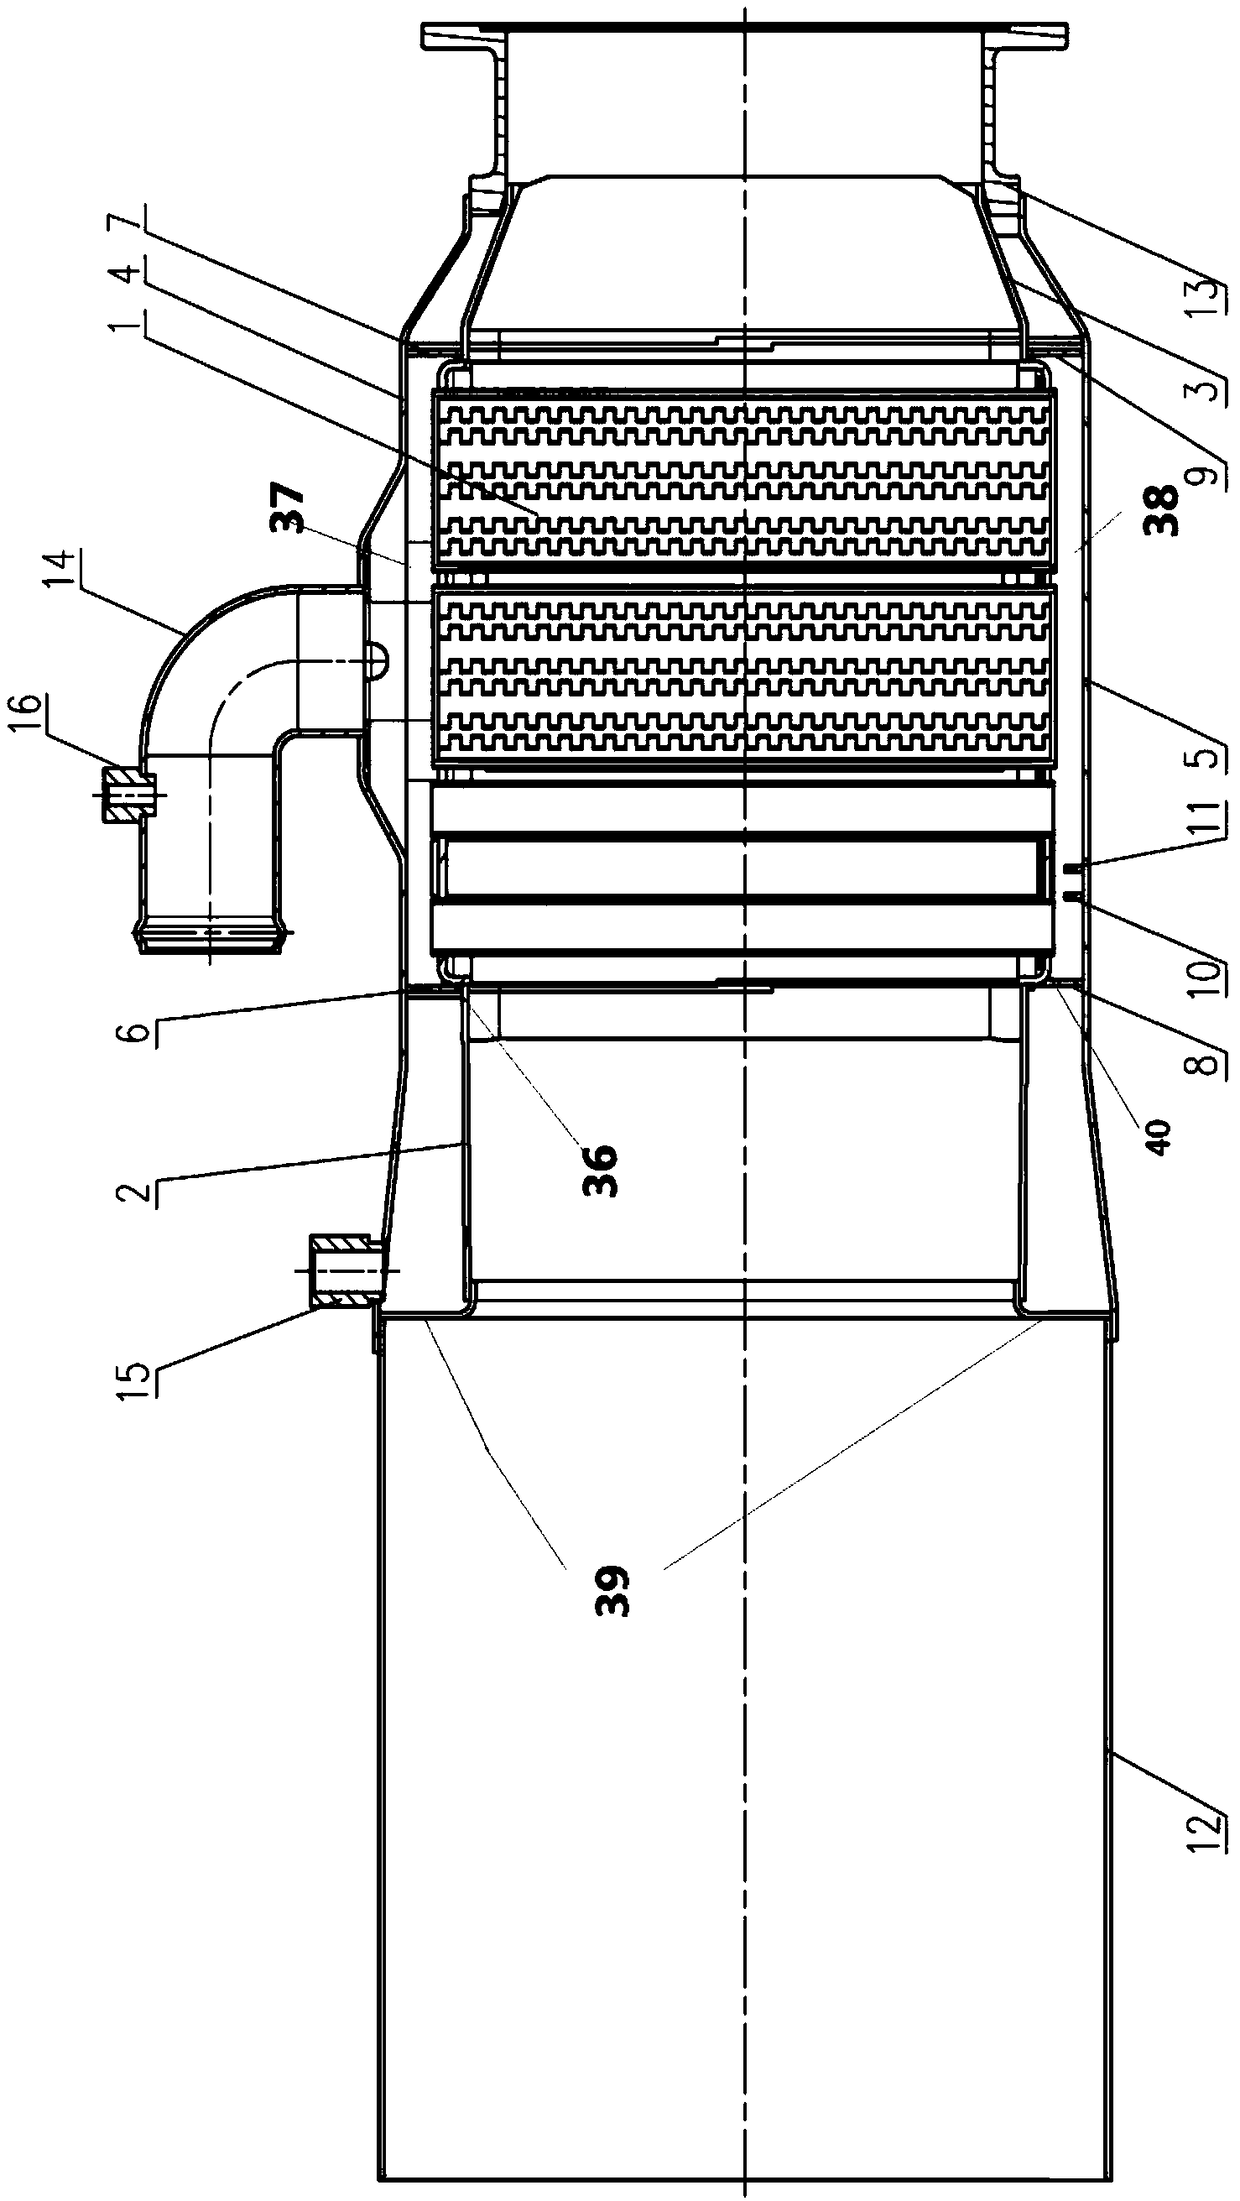 A combustion waste heat utilization heat exchange device with variable heat exchange structure spacing